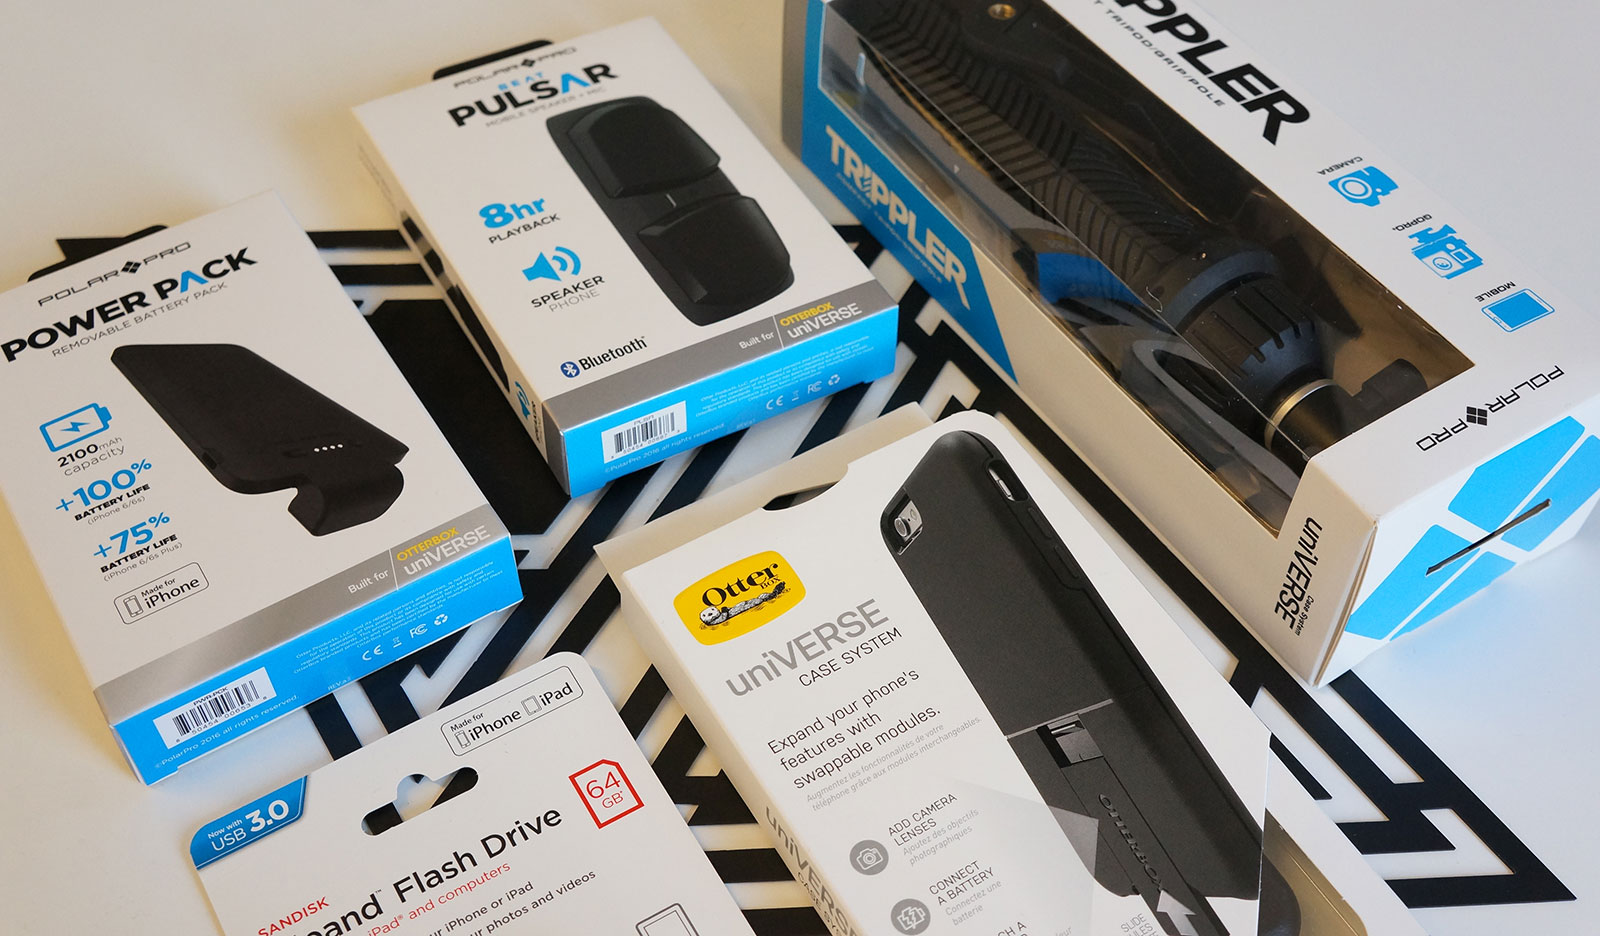 Engadget giveaway: Win a uniVERSE Case System courtesy of Otterbox!